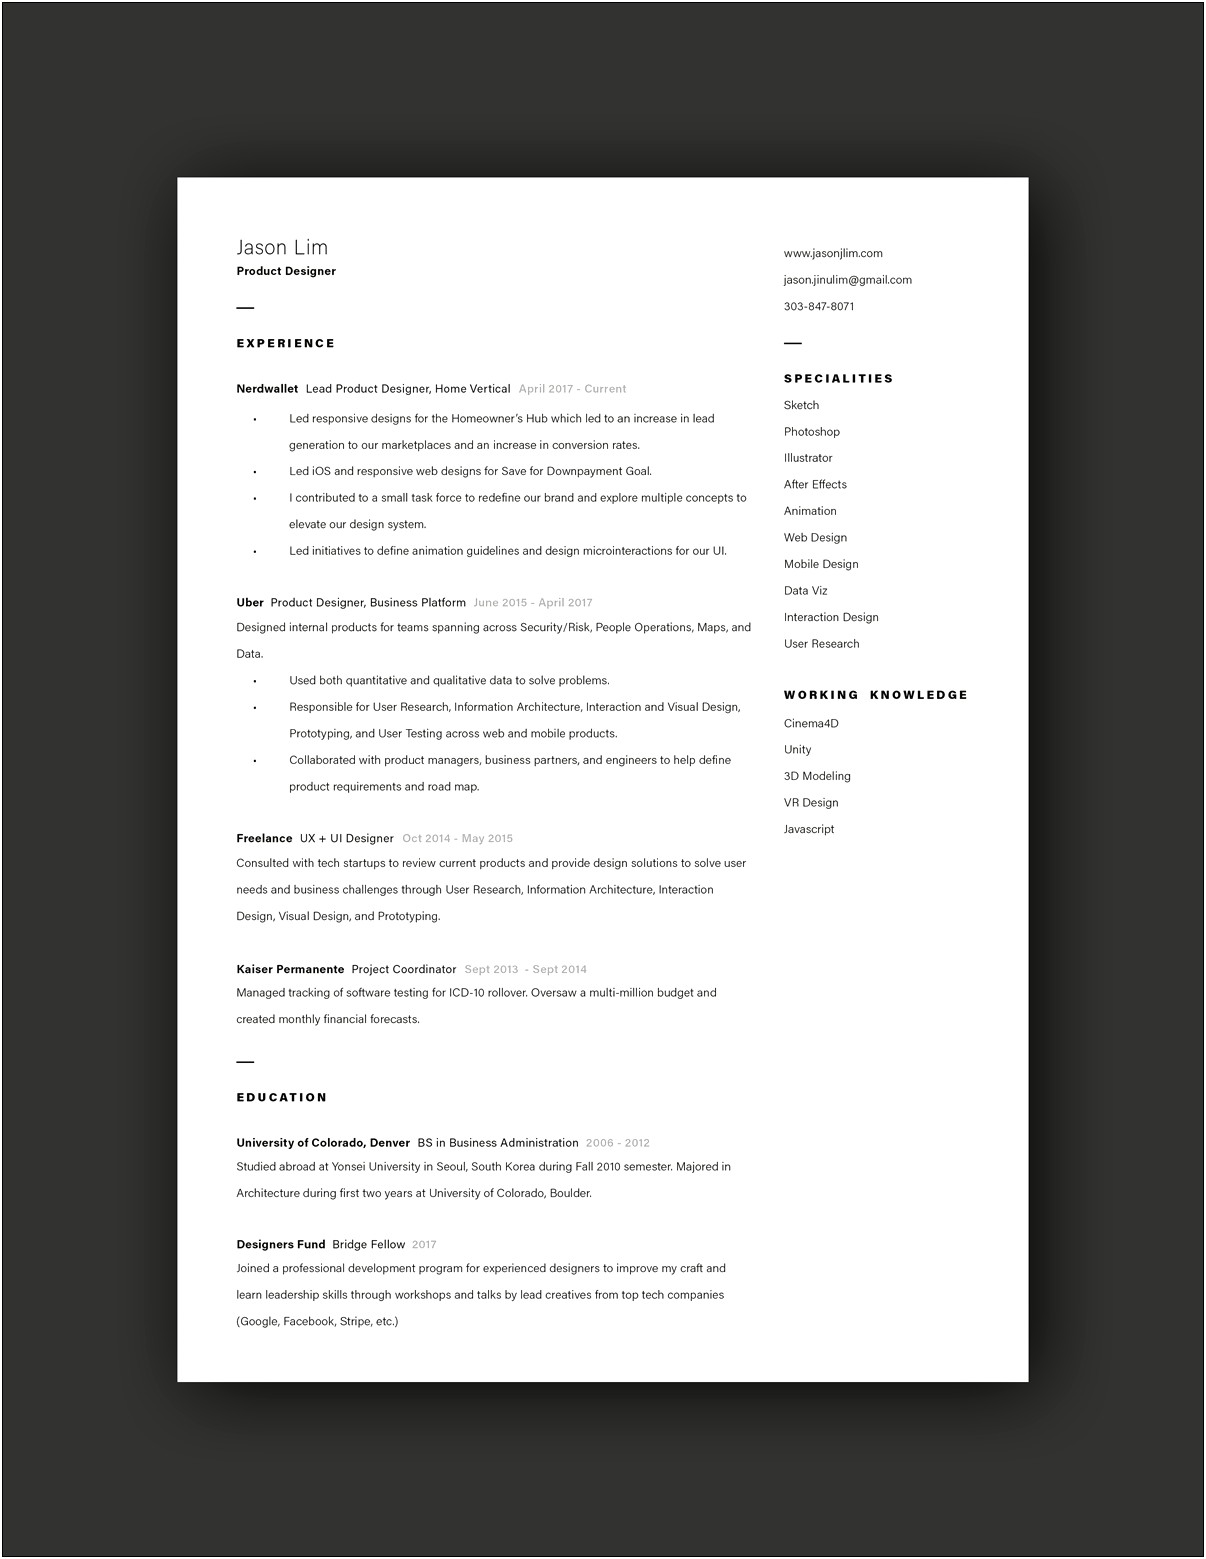 Resume Example For Job Application Pdf